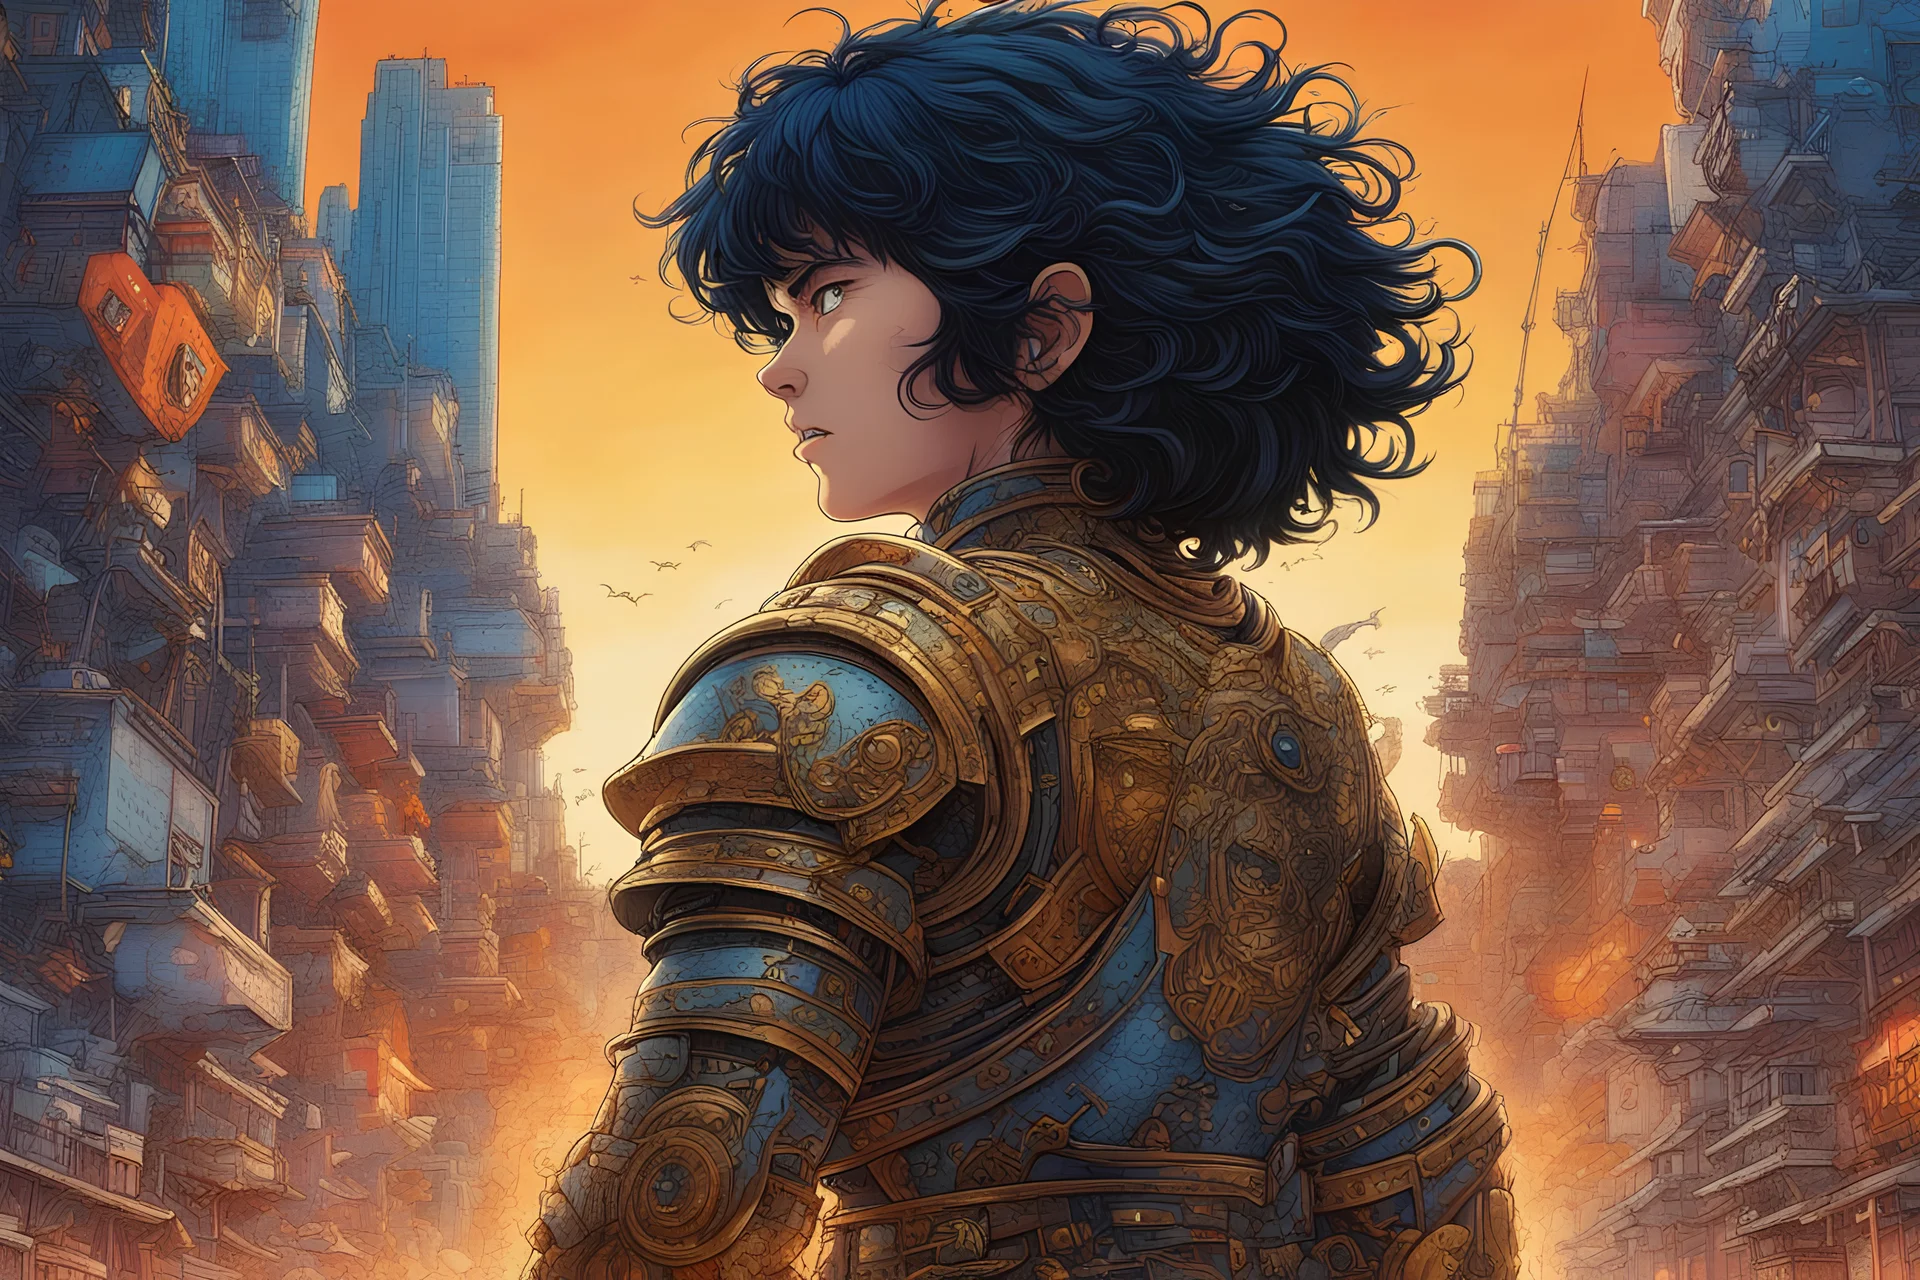 incredibly powerful sci-fiction Anime "TROY", created by Katsuhiro Otomo + Rumiko Takahashi, Movie poster style, box office hit, a masterpiece of storytelling, main character center focus,highly detailed 8k, intricate, detailed, rich colors, by Jean Giraud Moebius and Frank Frazetta portrait cyberpunk dynamic lighting award winning, Jacek Yerka Ken Sugimori, outer space, noah bradley, cyril roland, ross tran, intricate artwork masterpiece, ominous,matte painting mov